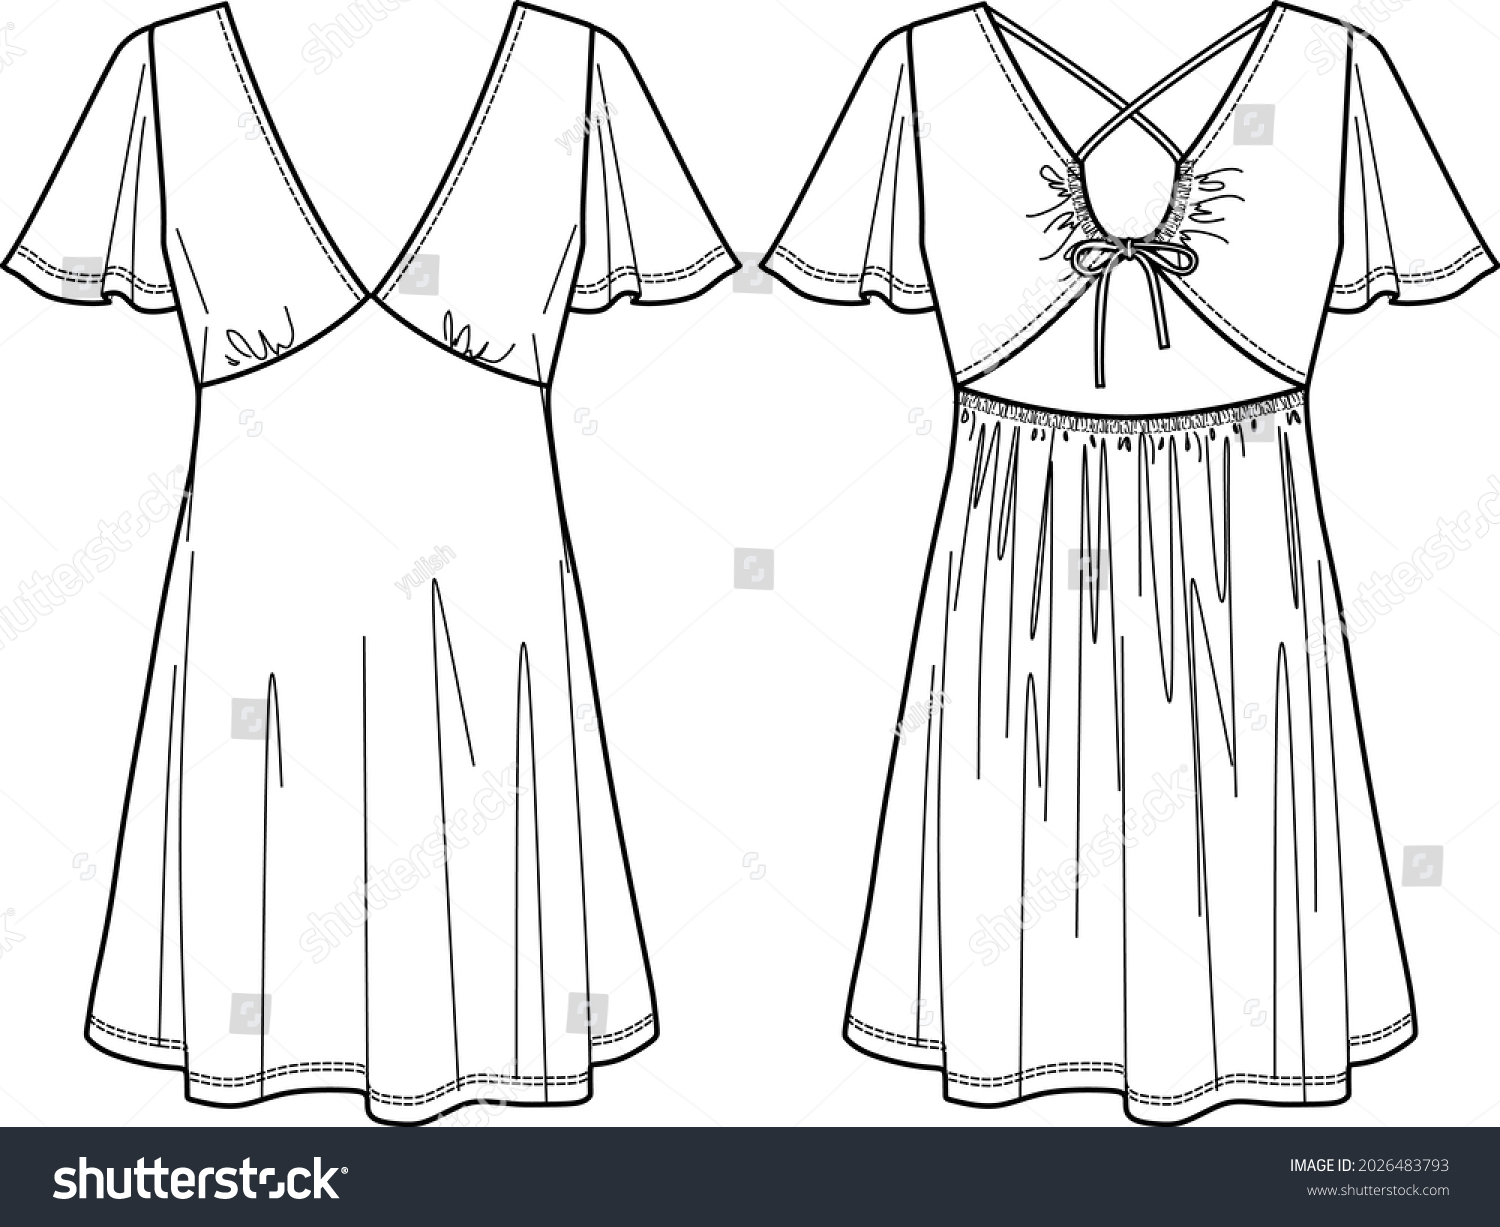 364,309 Dresses drawing Images, Stock Photos & Vectors | Shutterstock